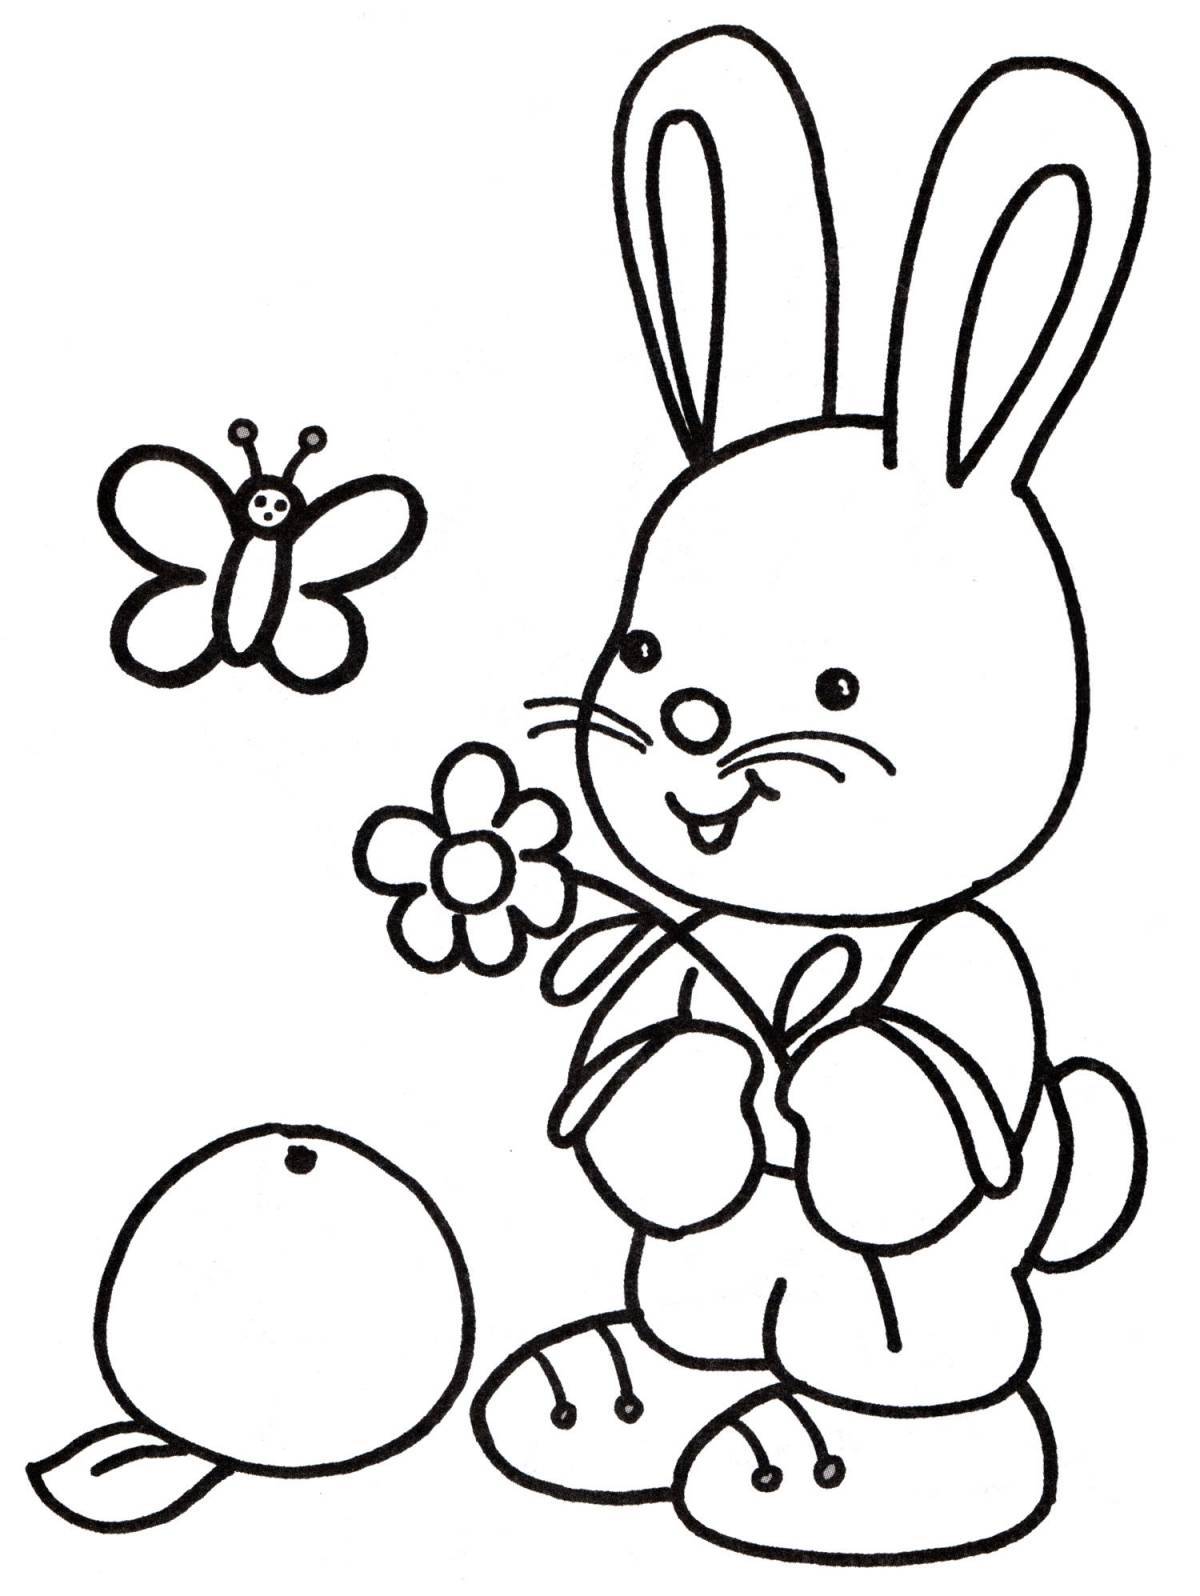 Creative coloring rabbit for children 3-4 years old